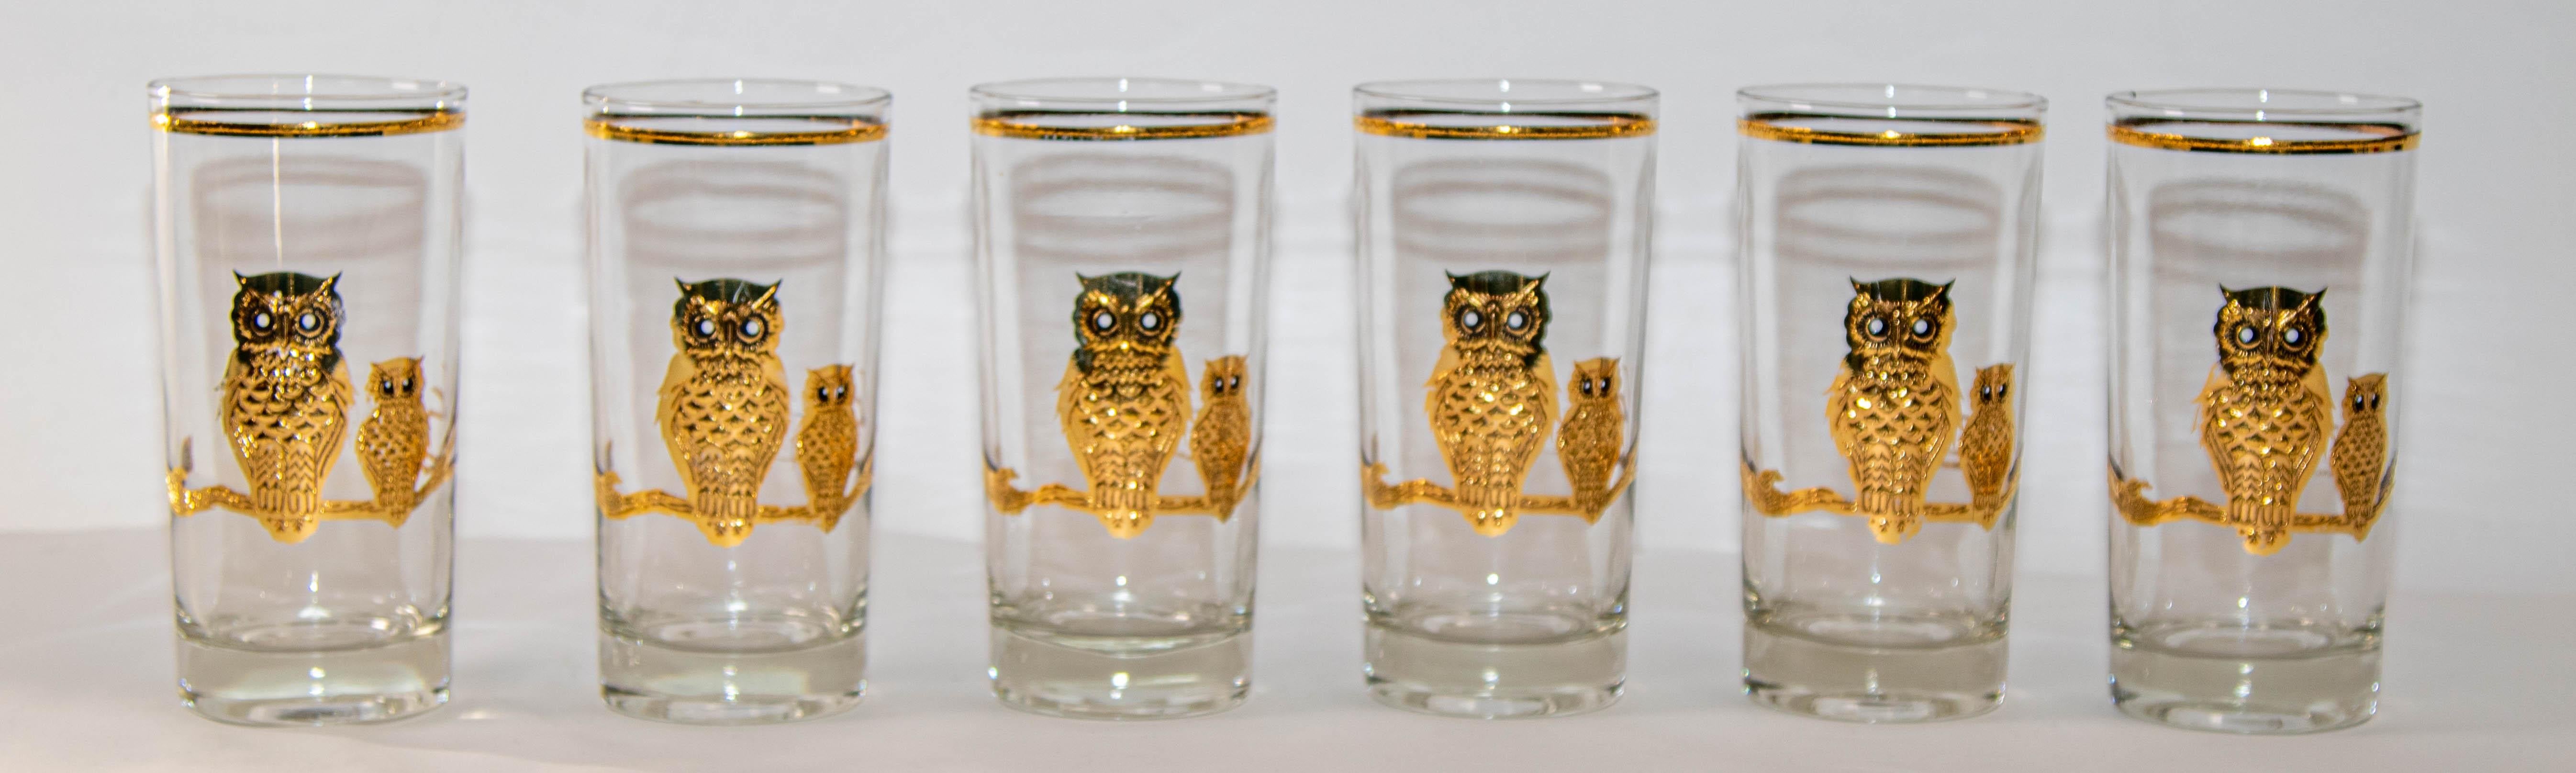 1950's Vintage Culver Ltd Highball Drinking Glasses with 22K Gold Owls Set of 6 For Sale 6